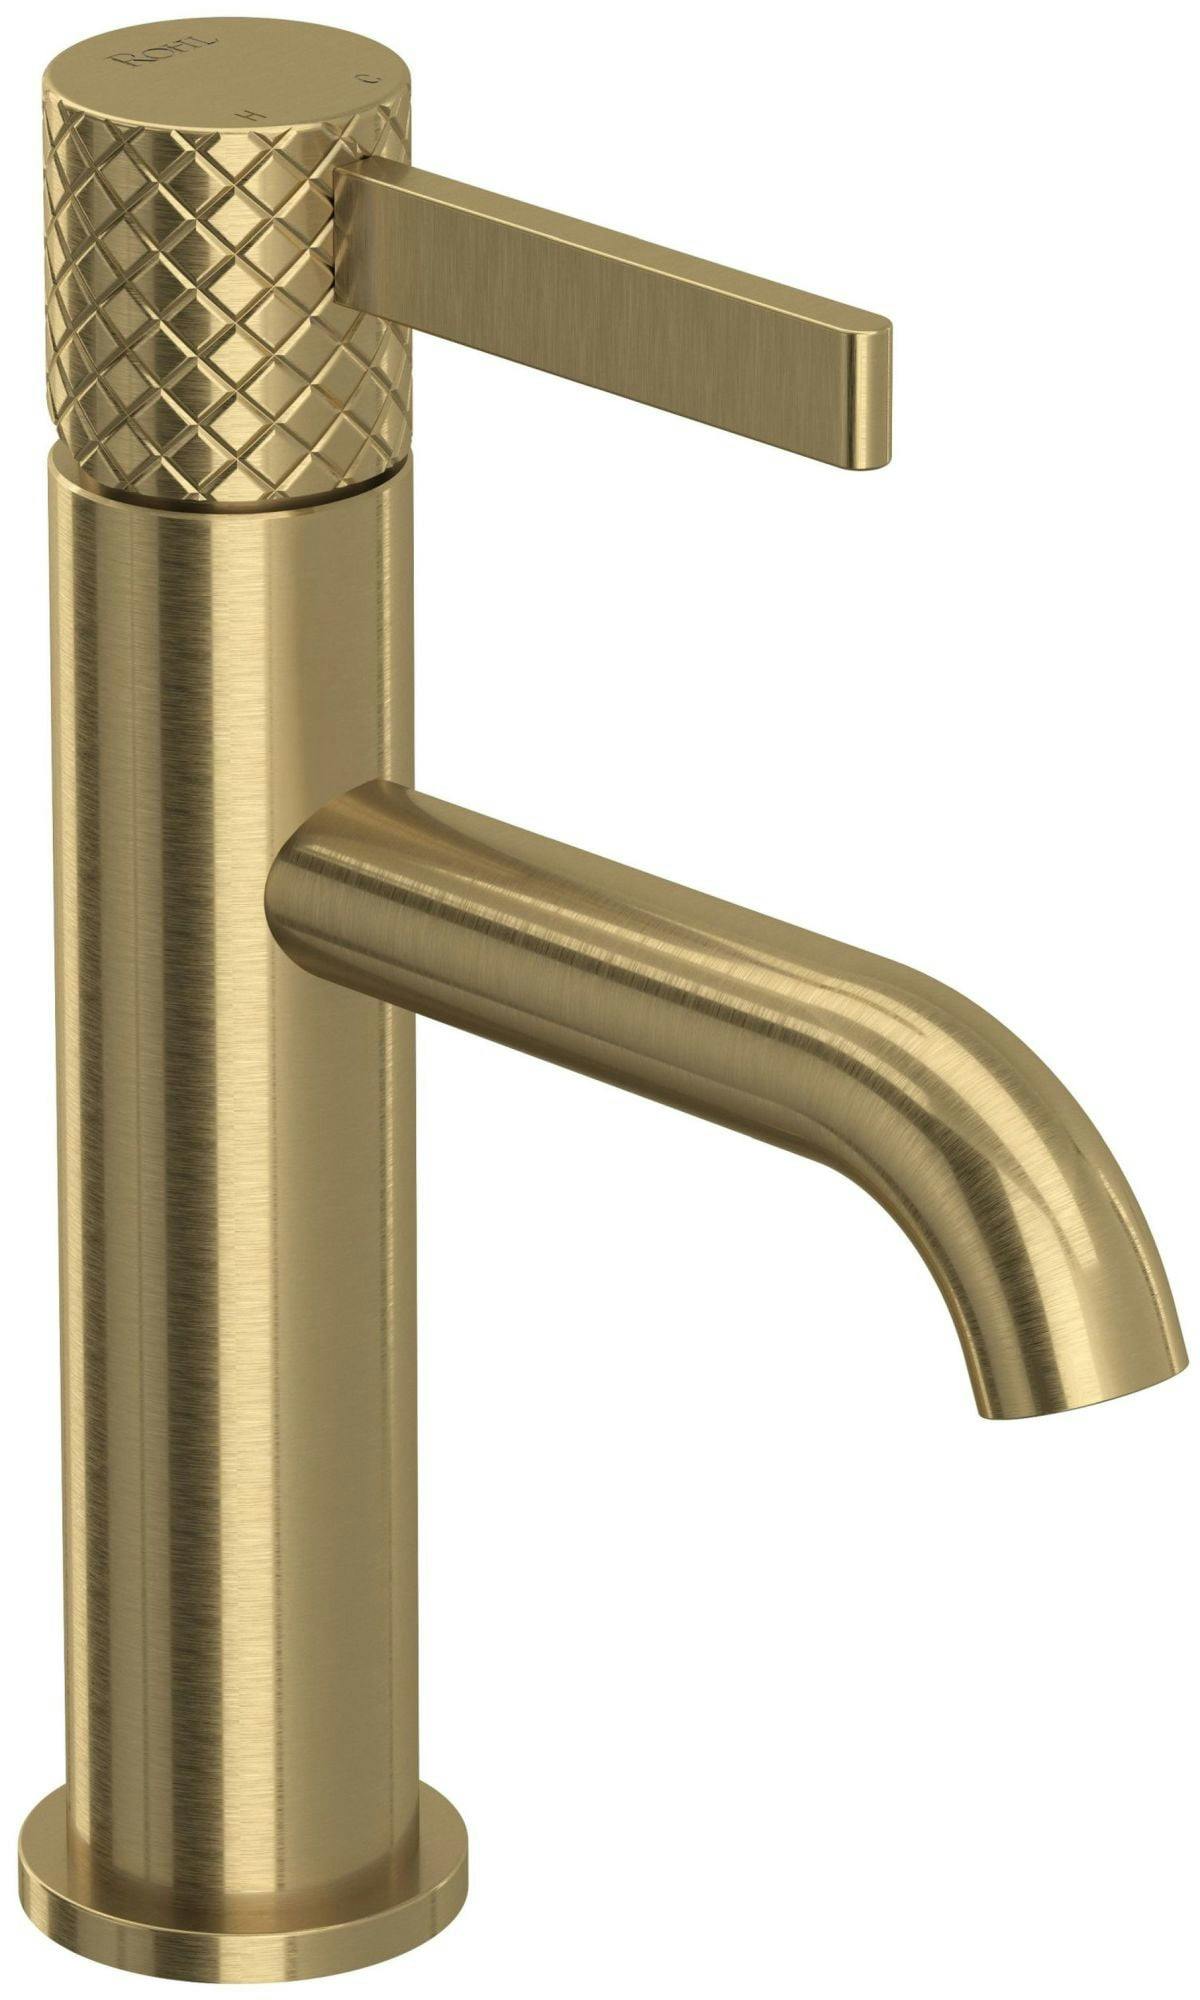 Elegant Tenerife Polished Nickel Single Hole Faucet with Brass Accents